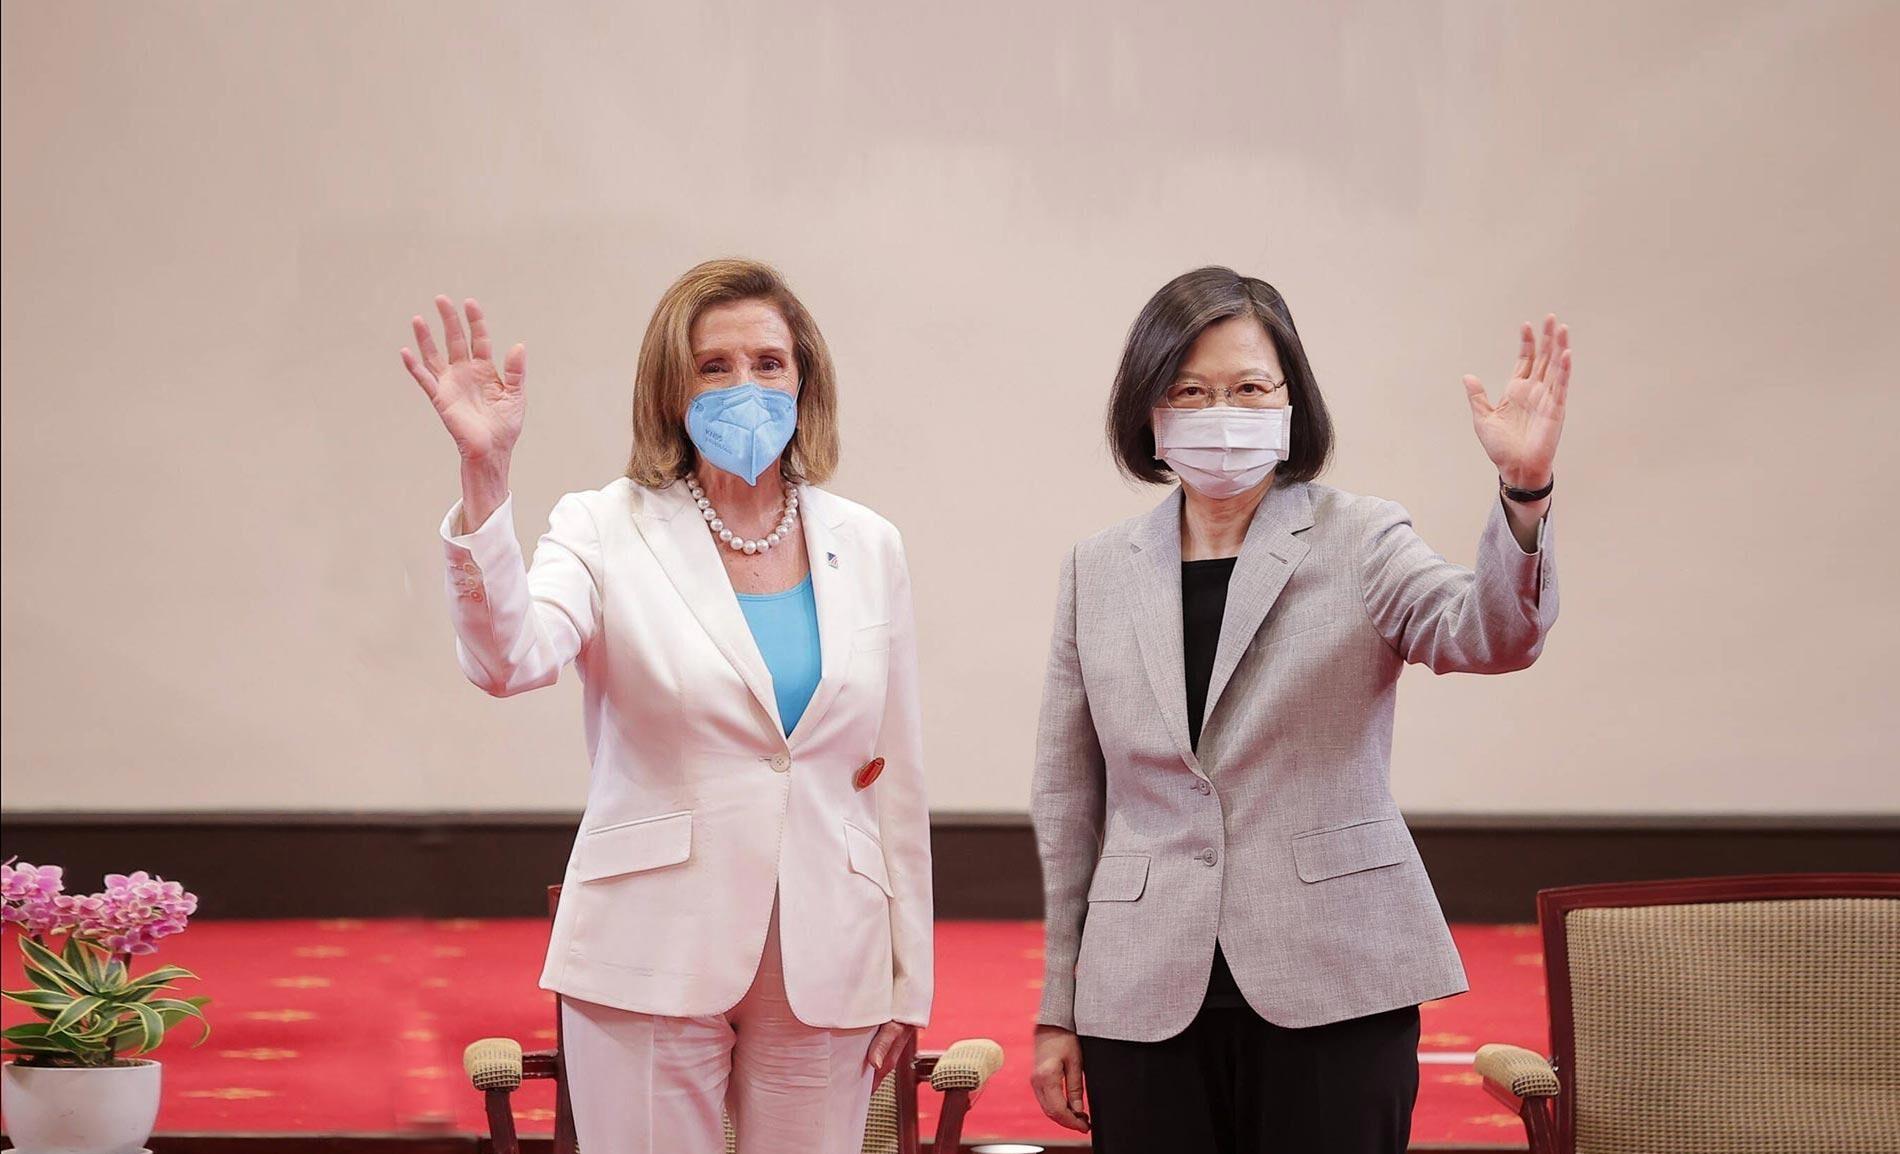 Pelosi’s Visit to Taiwan Marks the “New Normal” in the Taiwan Straits